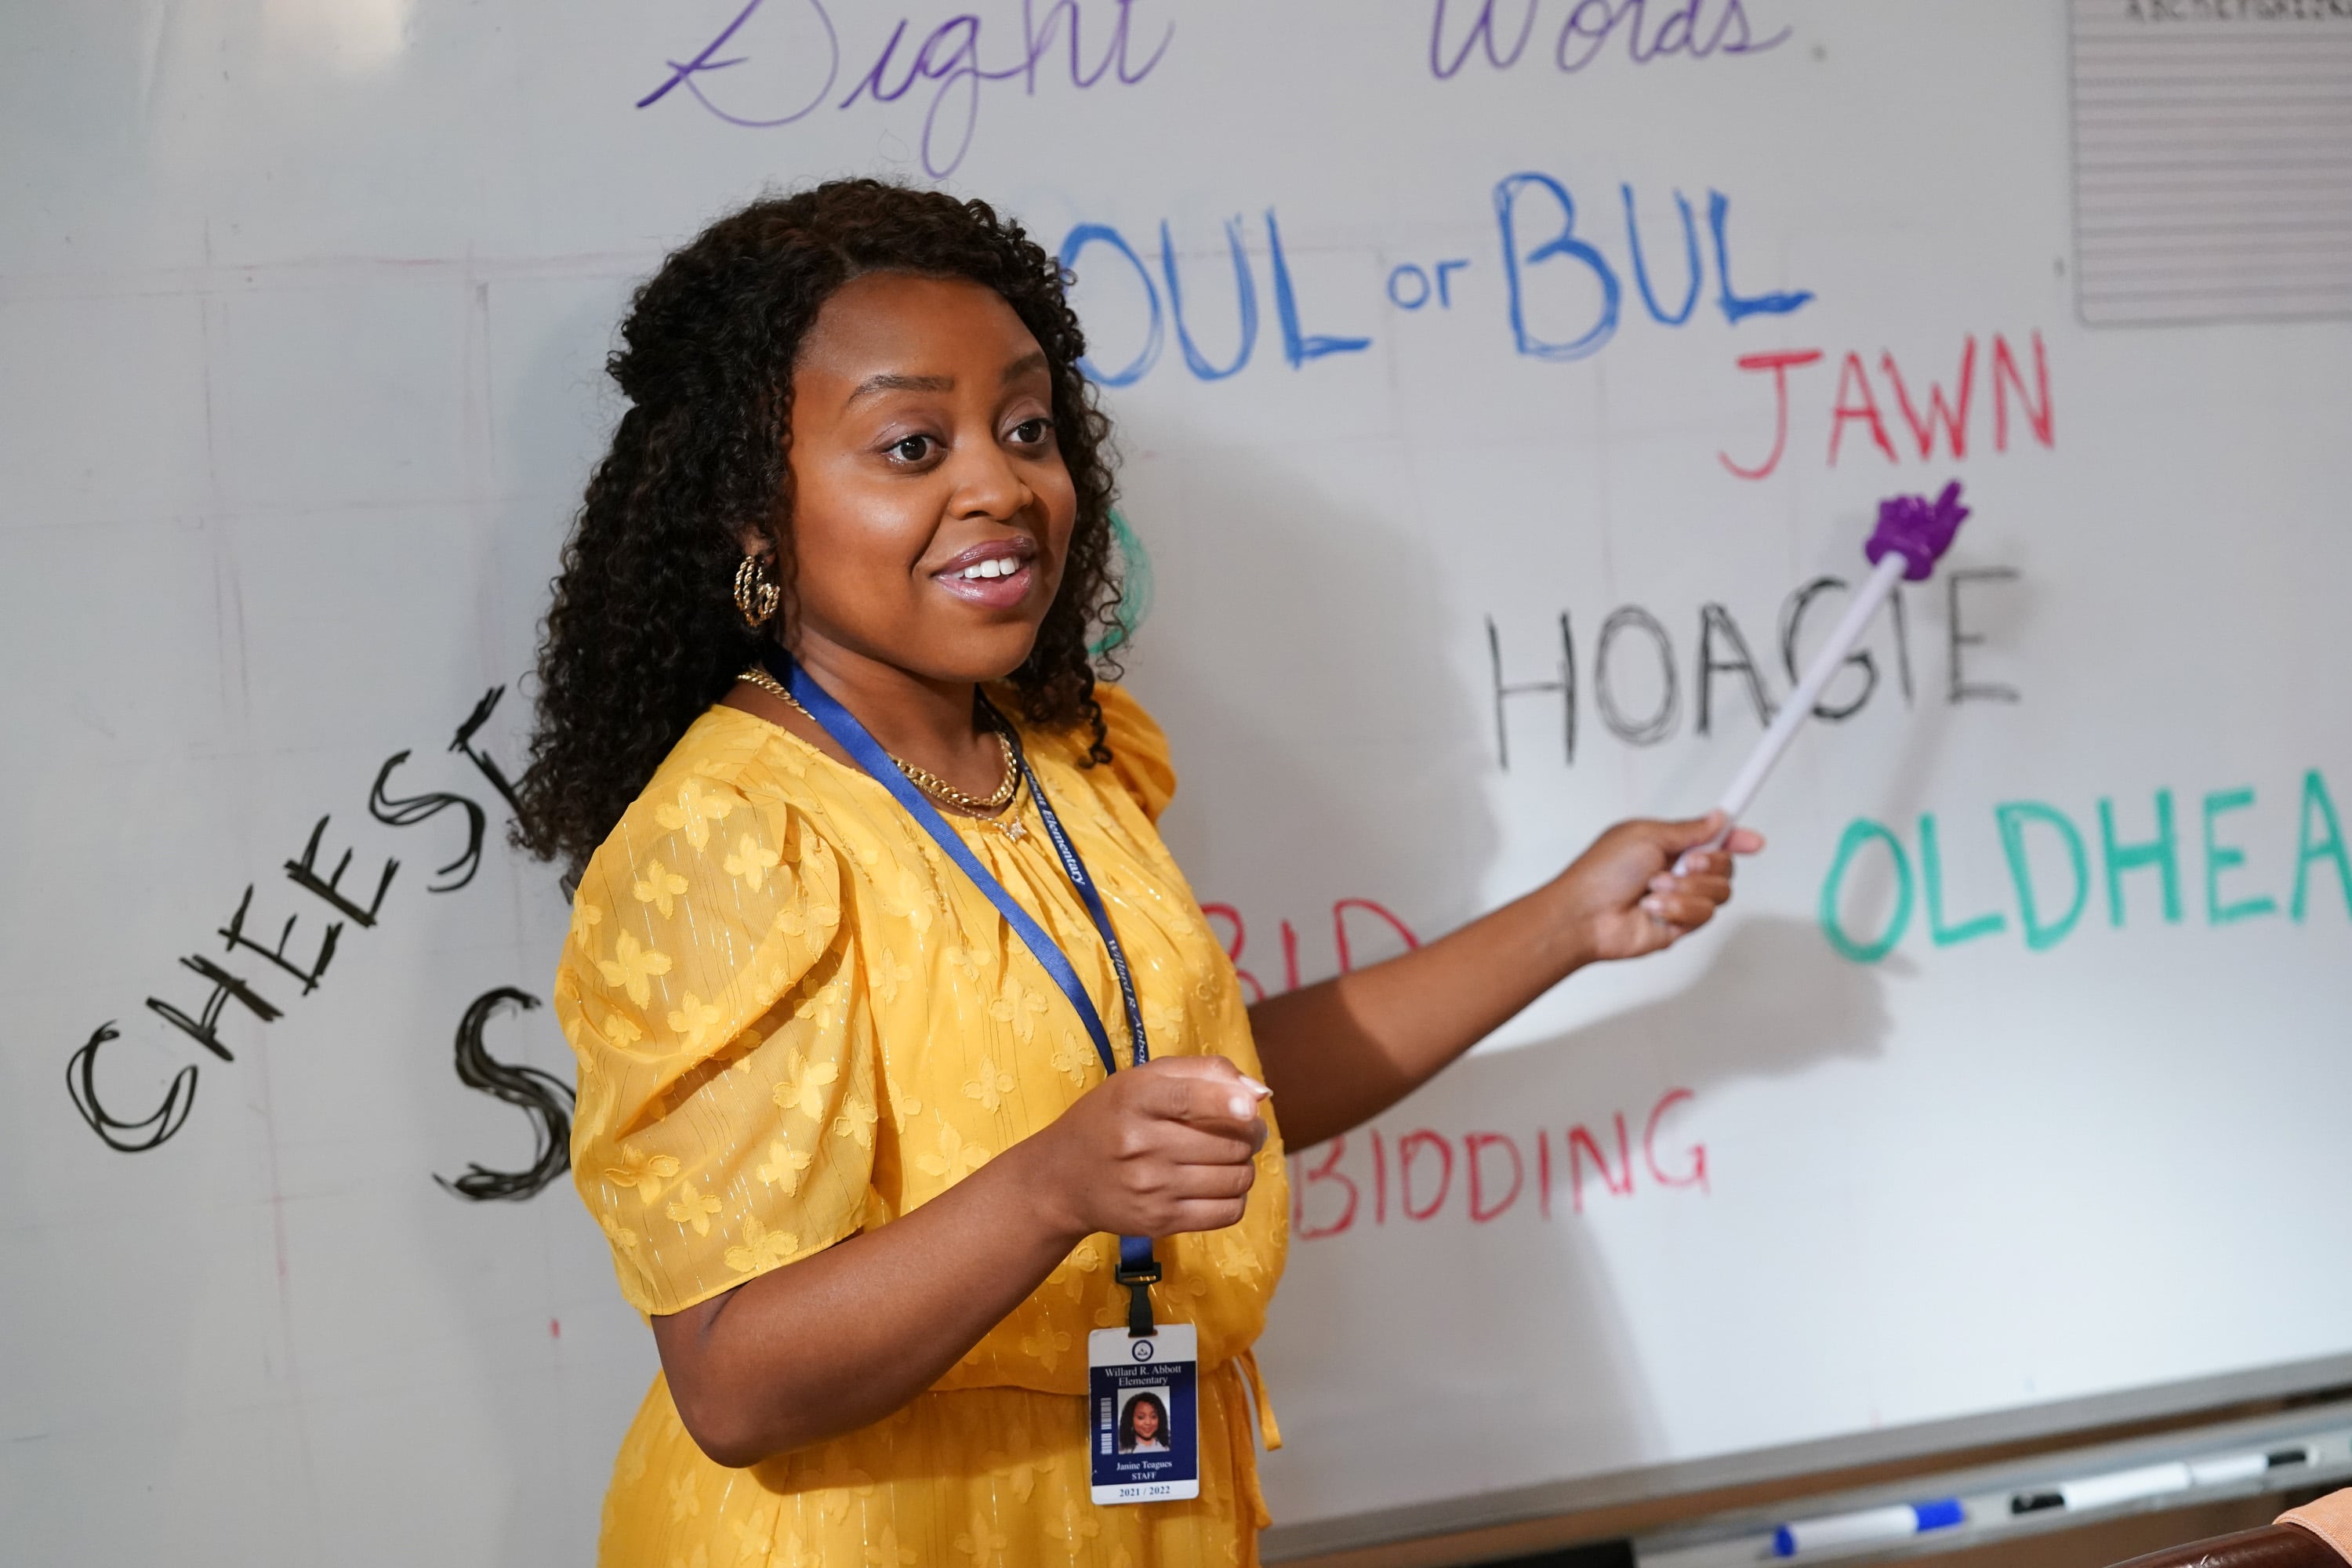 In a scene from Abbott Elementary, Quinta Brunson’s character teaches Philly slang on a white board, including words like “jawn” and “boul”.